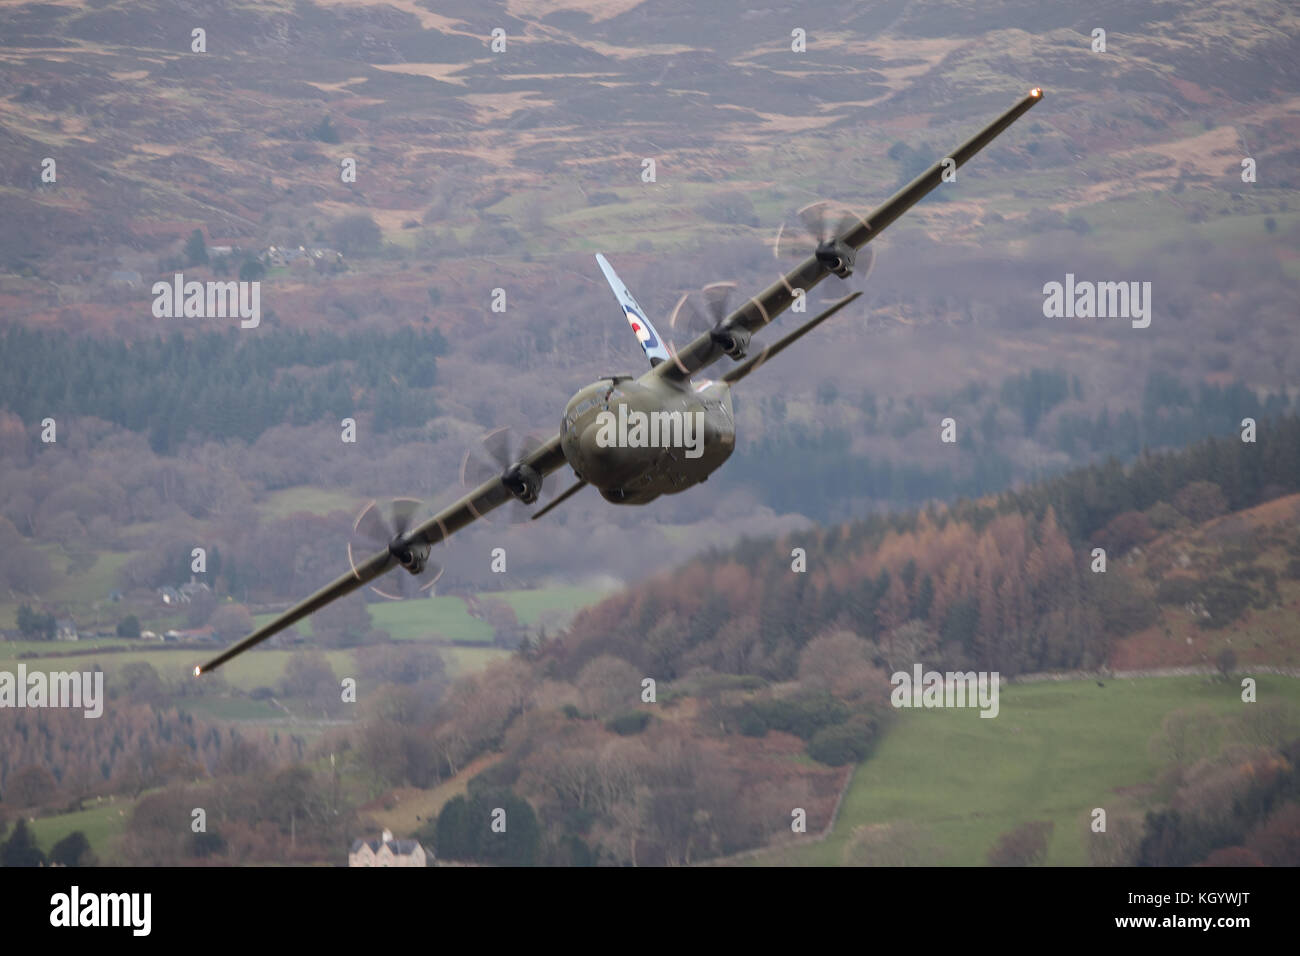 Royal Air Force two ship Hercules Flight conducting low flying training sortie in Snowdonia. Stock Photo